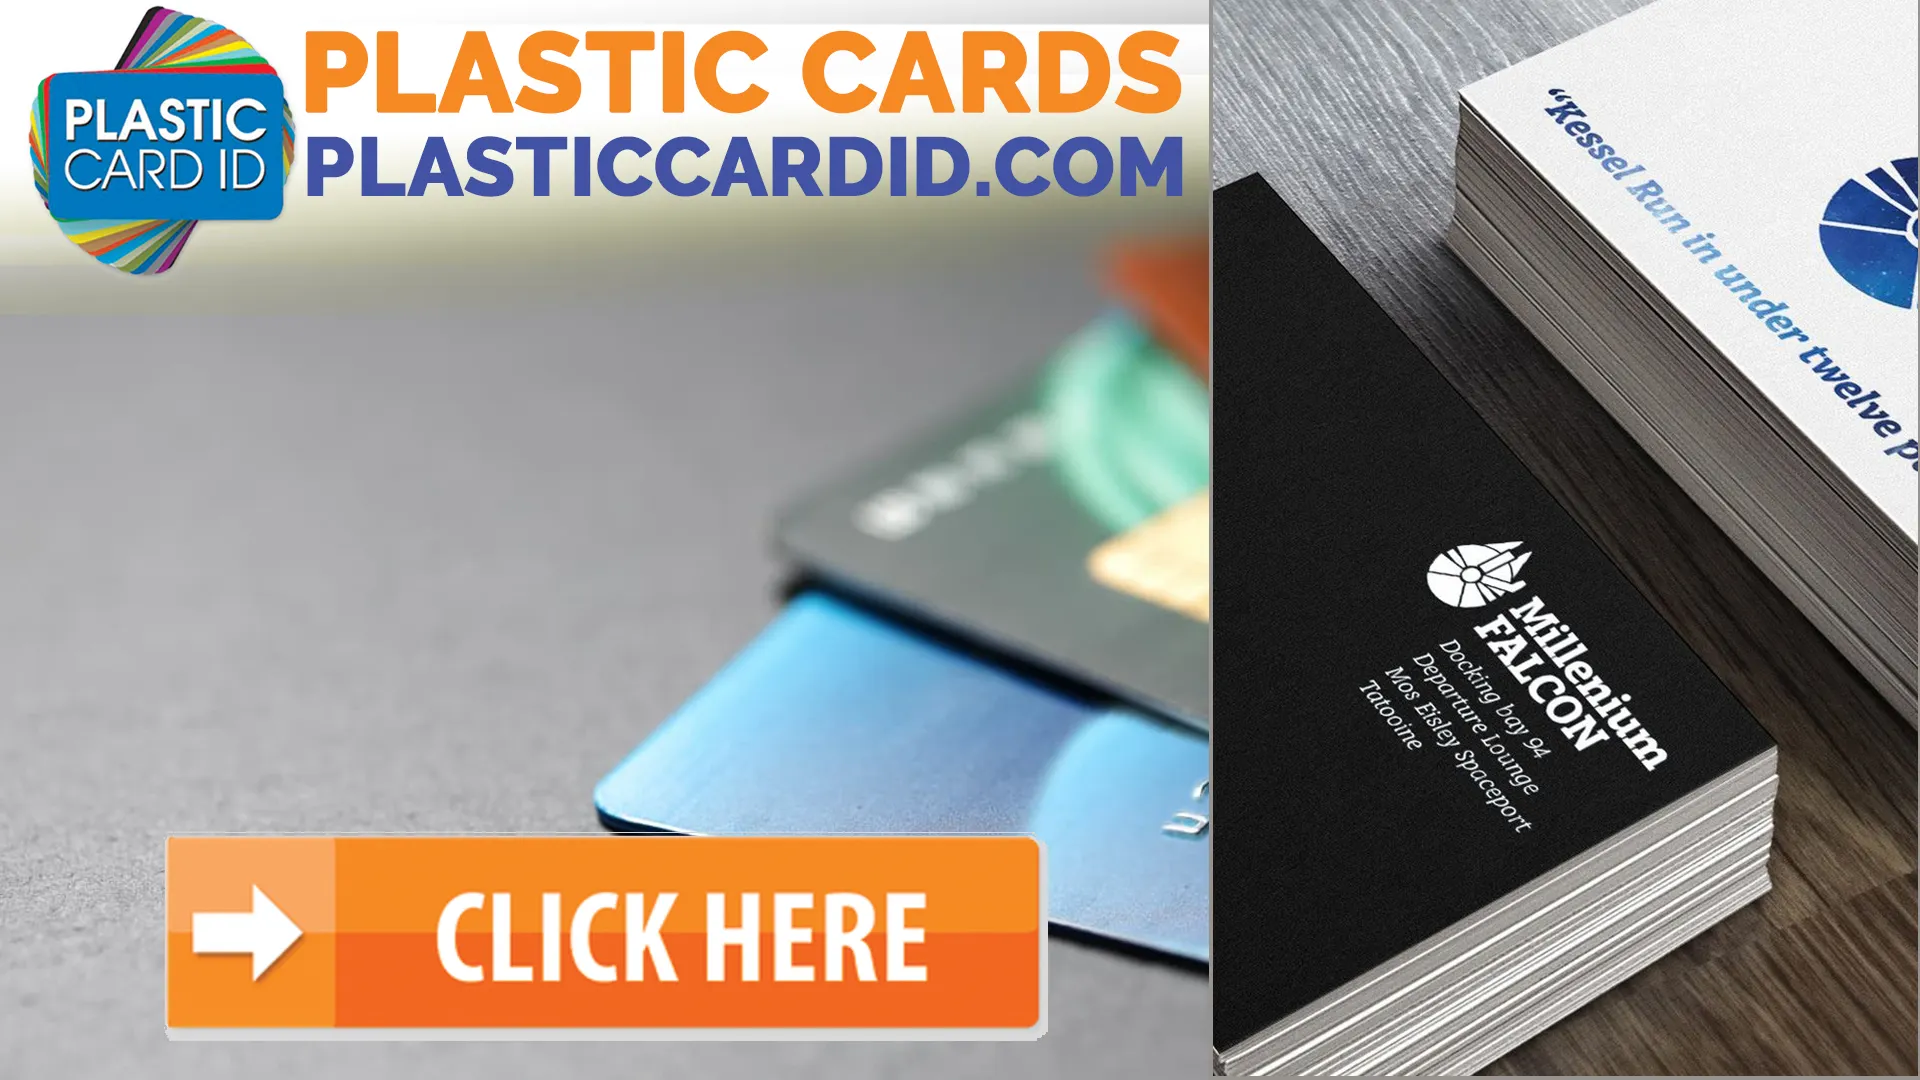 Welcome to the World of Exceptional Plastic Card Design with Plastic Card ID




